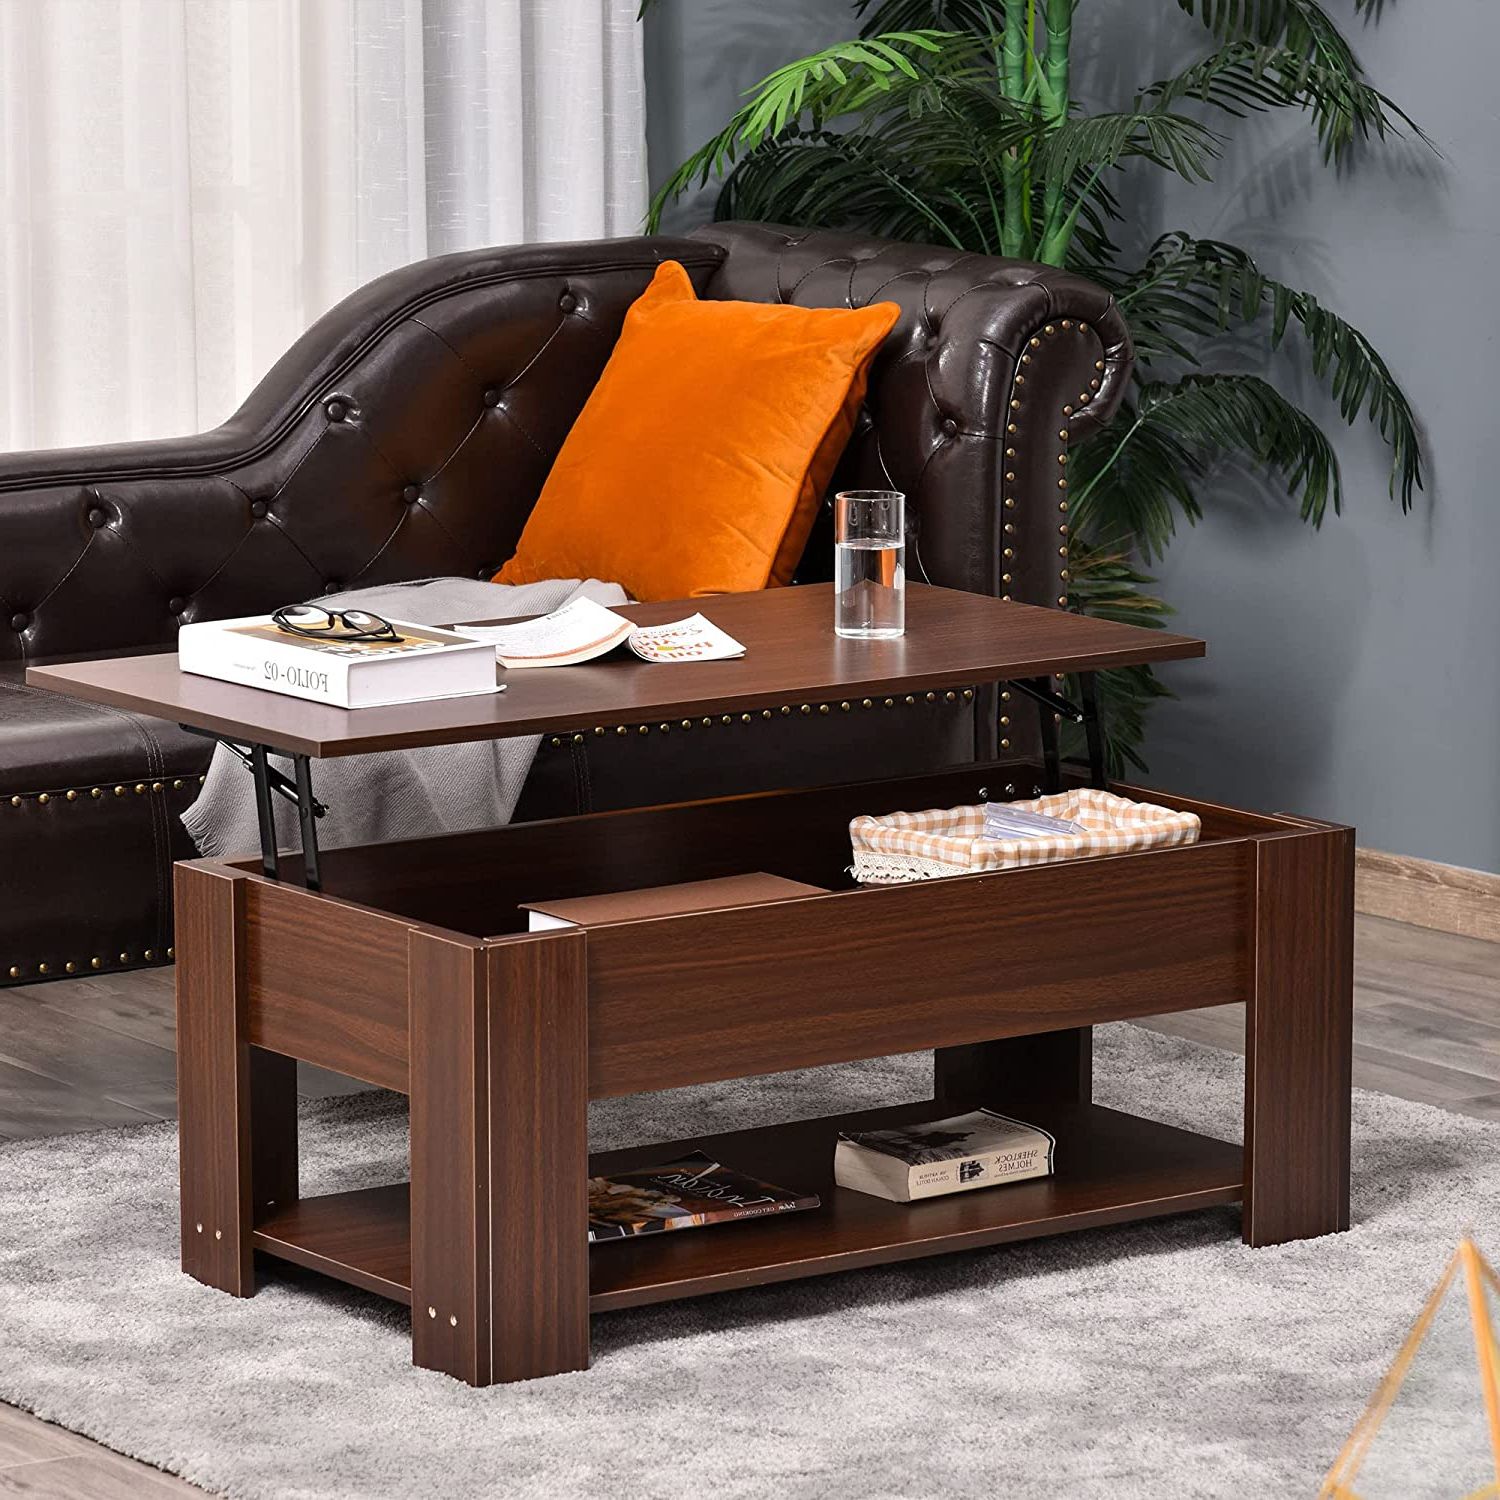 Lift Top Coffee Table With Hidden Storage Compartment And Open Shelf, Pop  Up Coffee Table For Living Room, Brown – Walmart Regarding Favorite Open Shelf Coffee Tables (View 2 of 20)